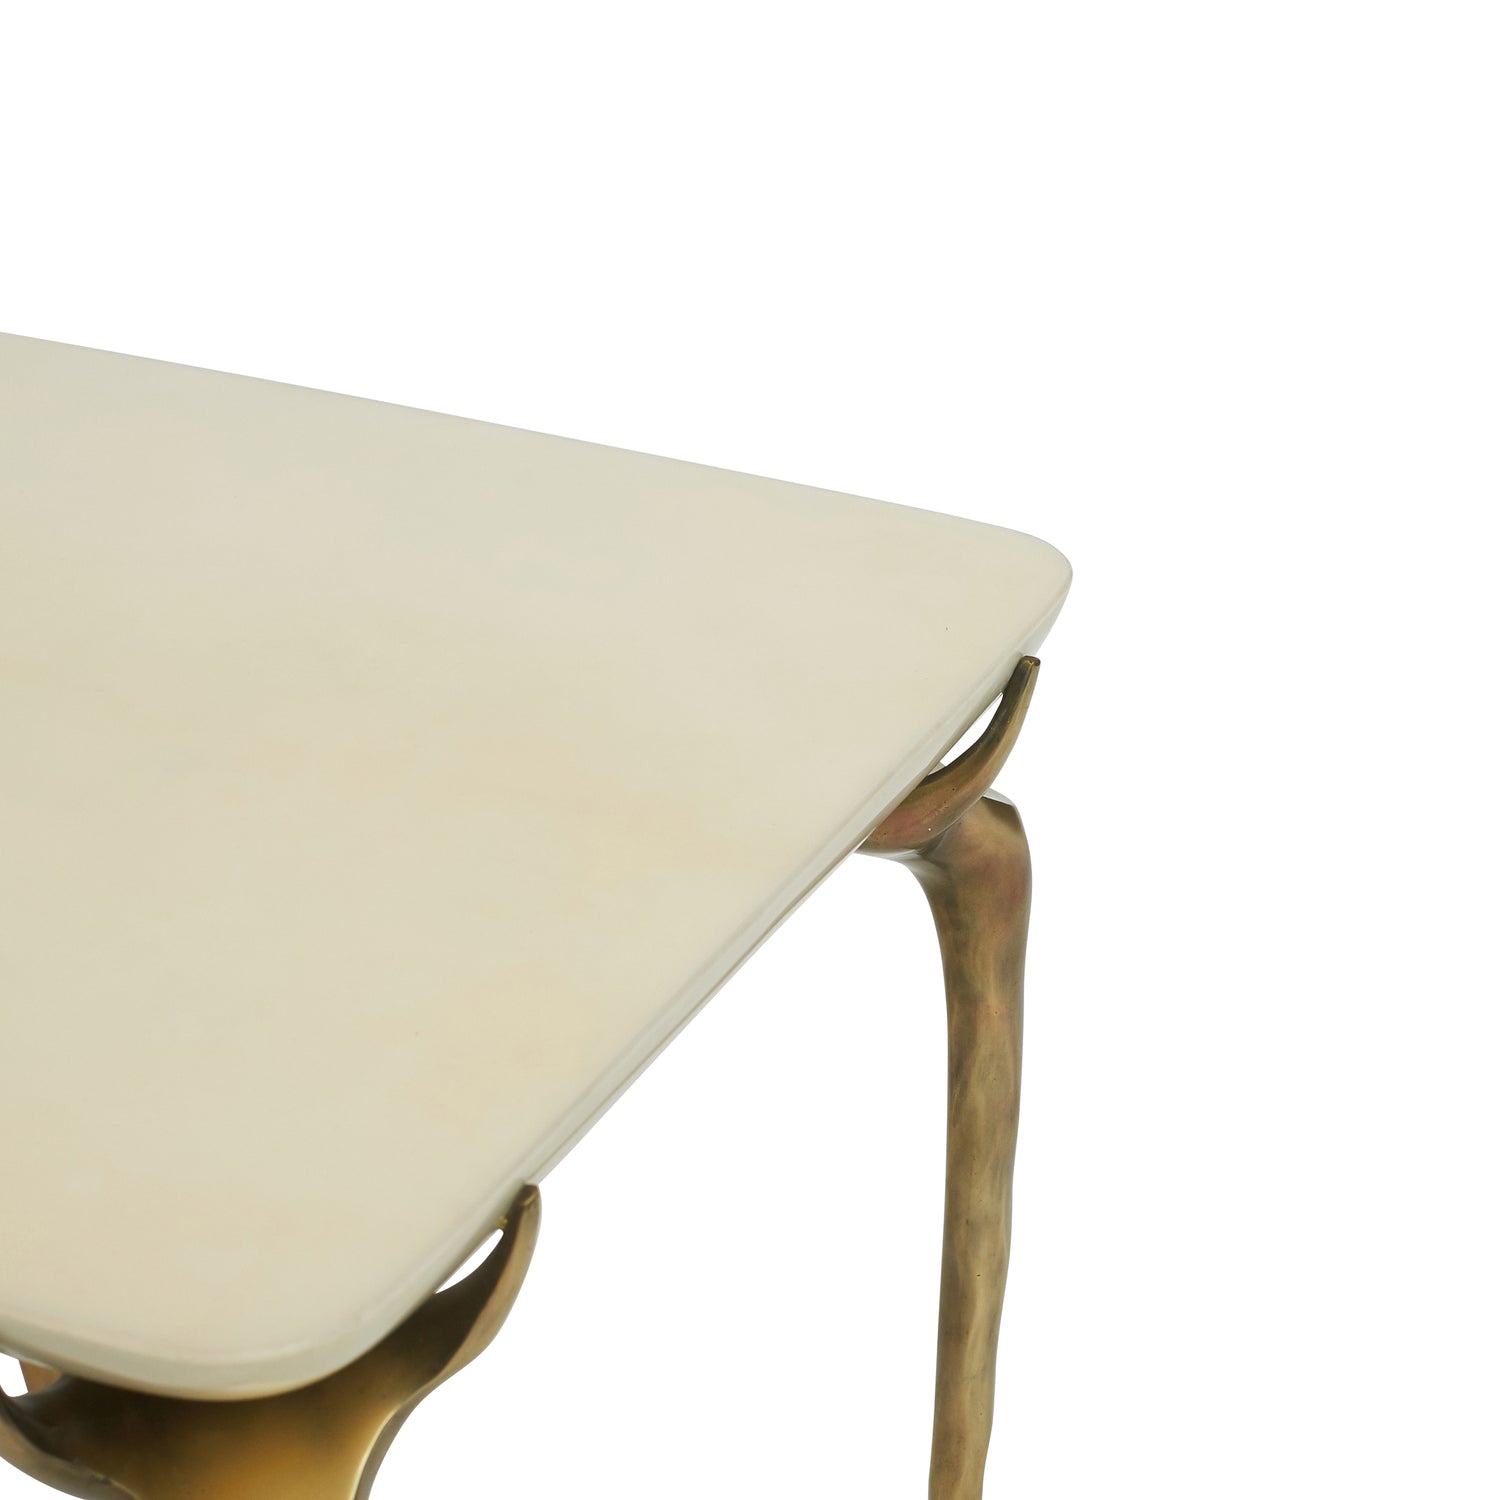 Cimbrone Side Table